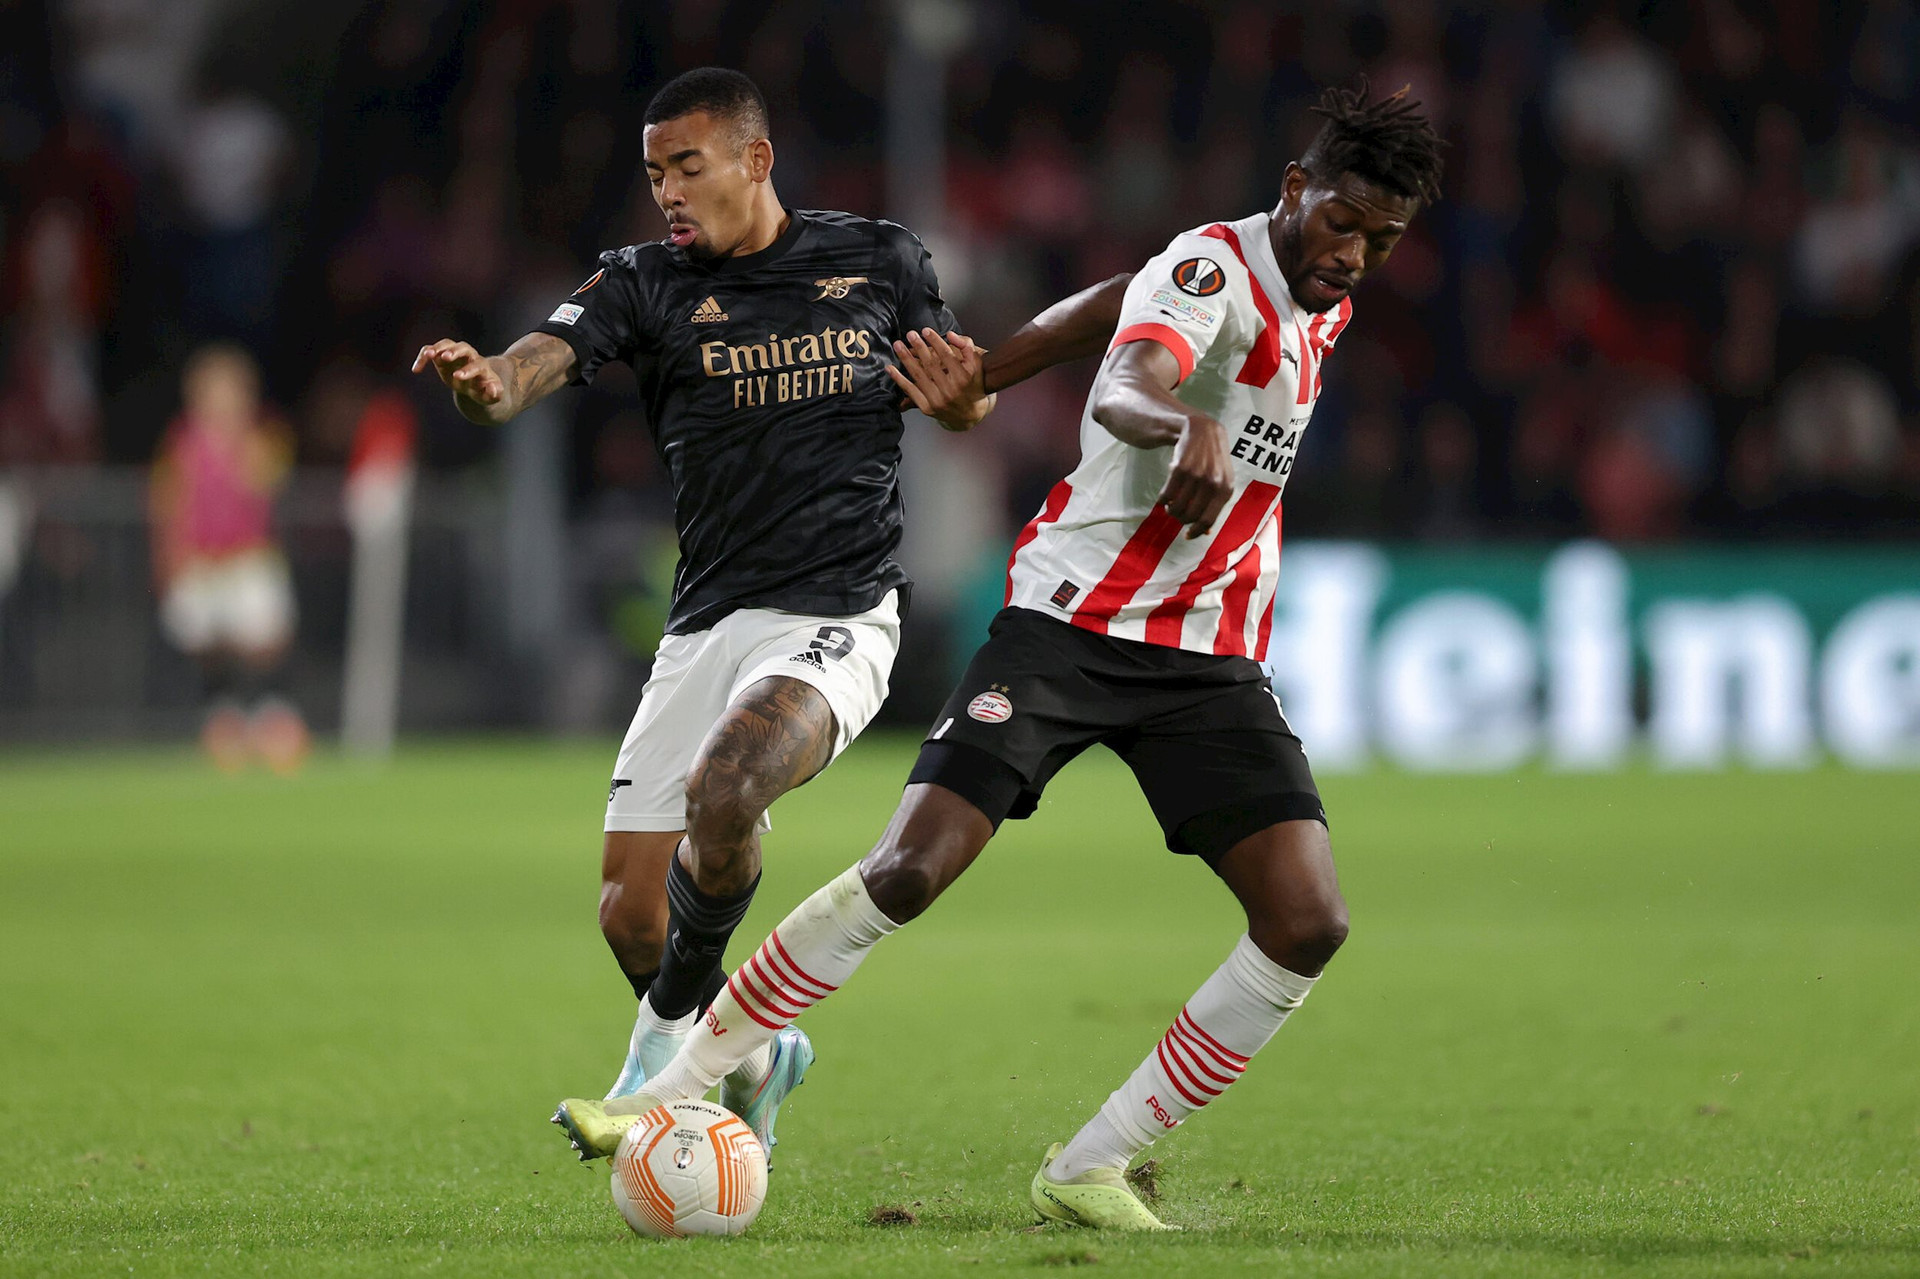 psv-eindhoven-v-arsenal-fc-group-a-uefa-europa-league-scaled.jpg